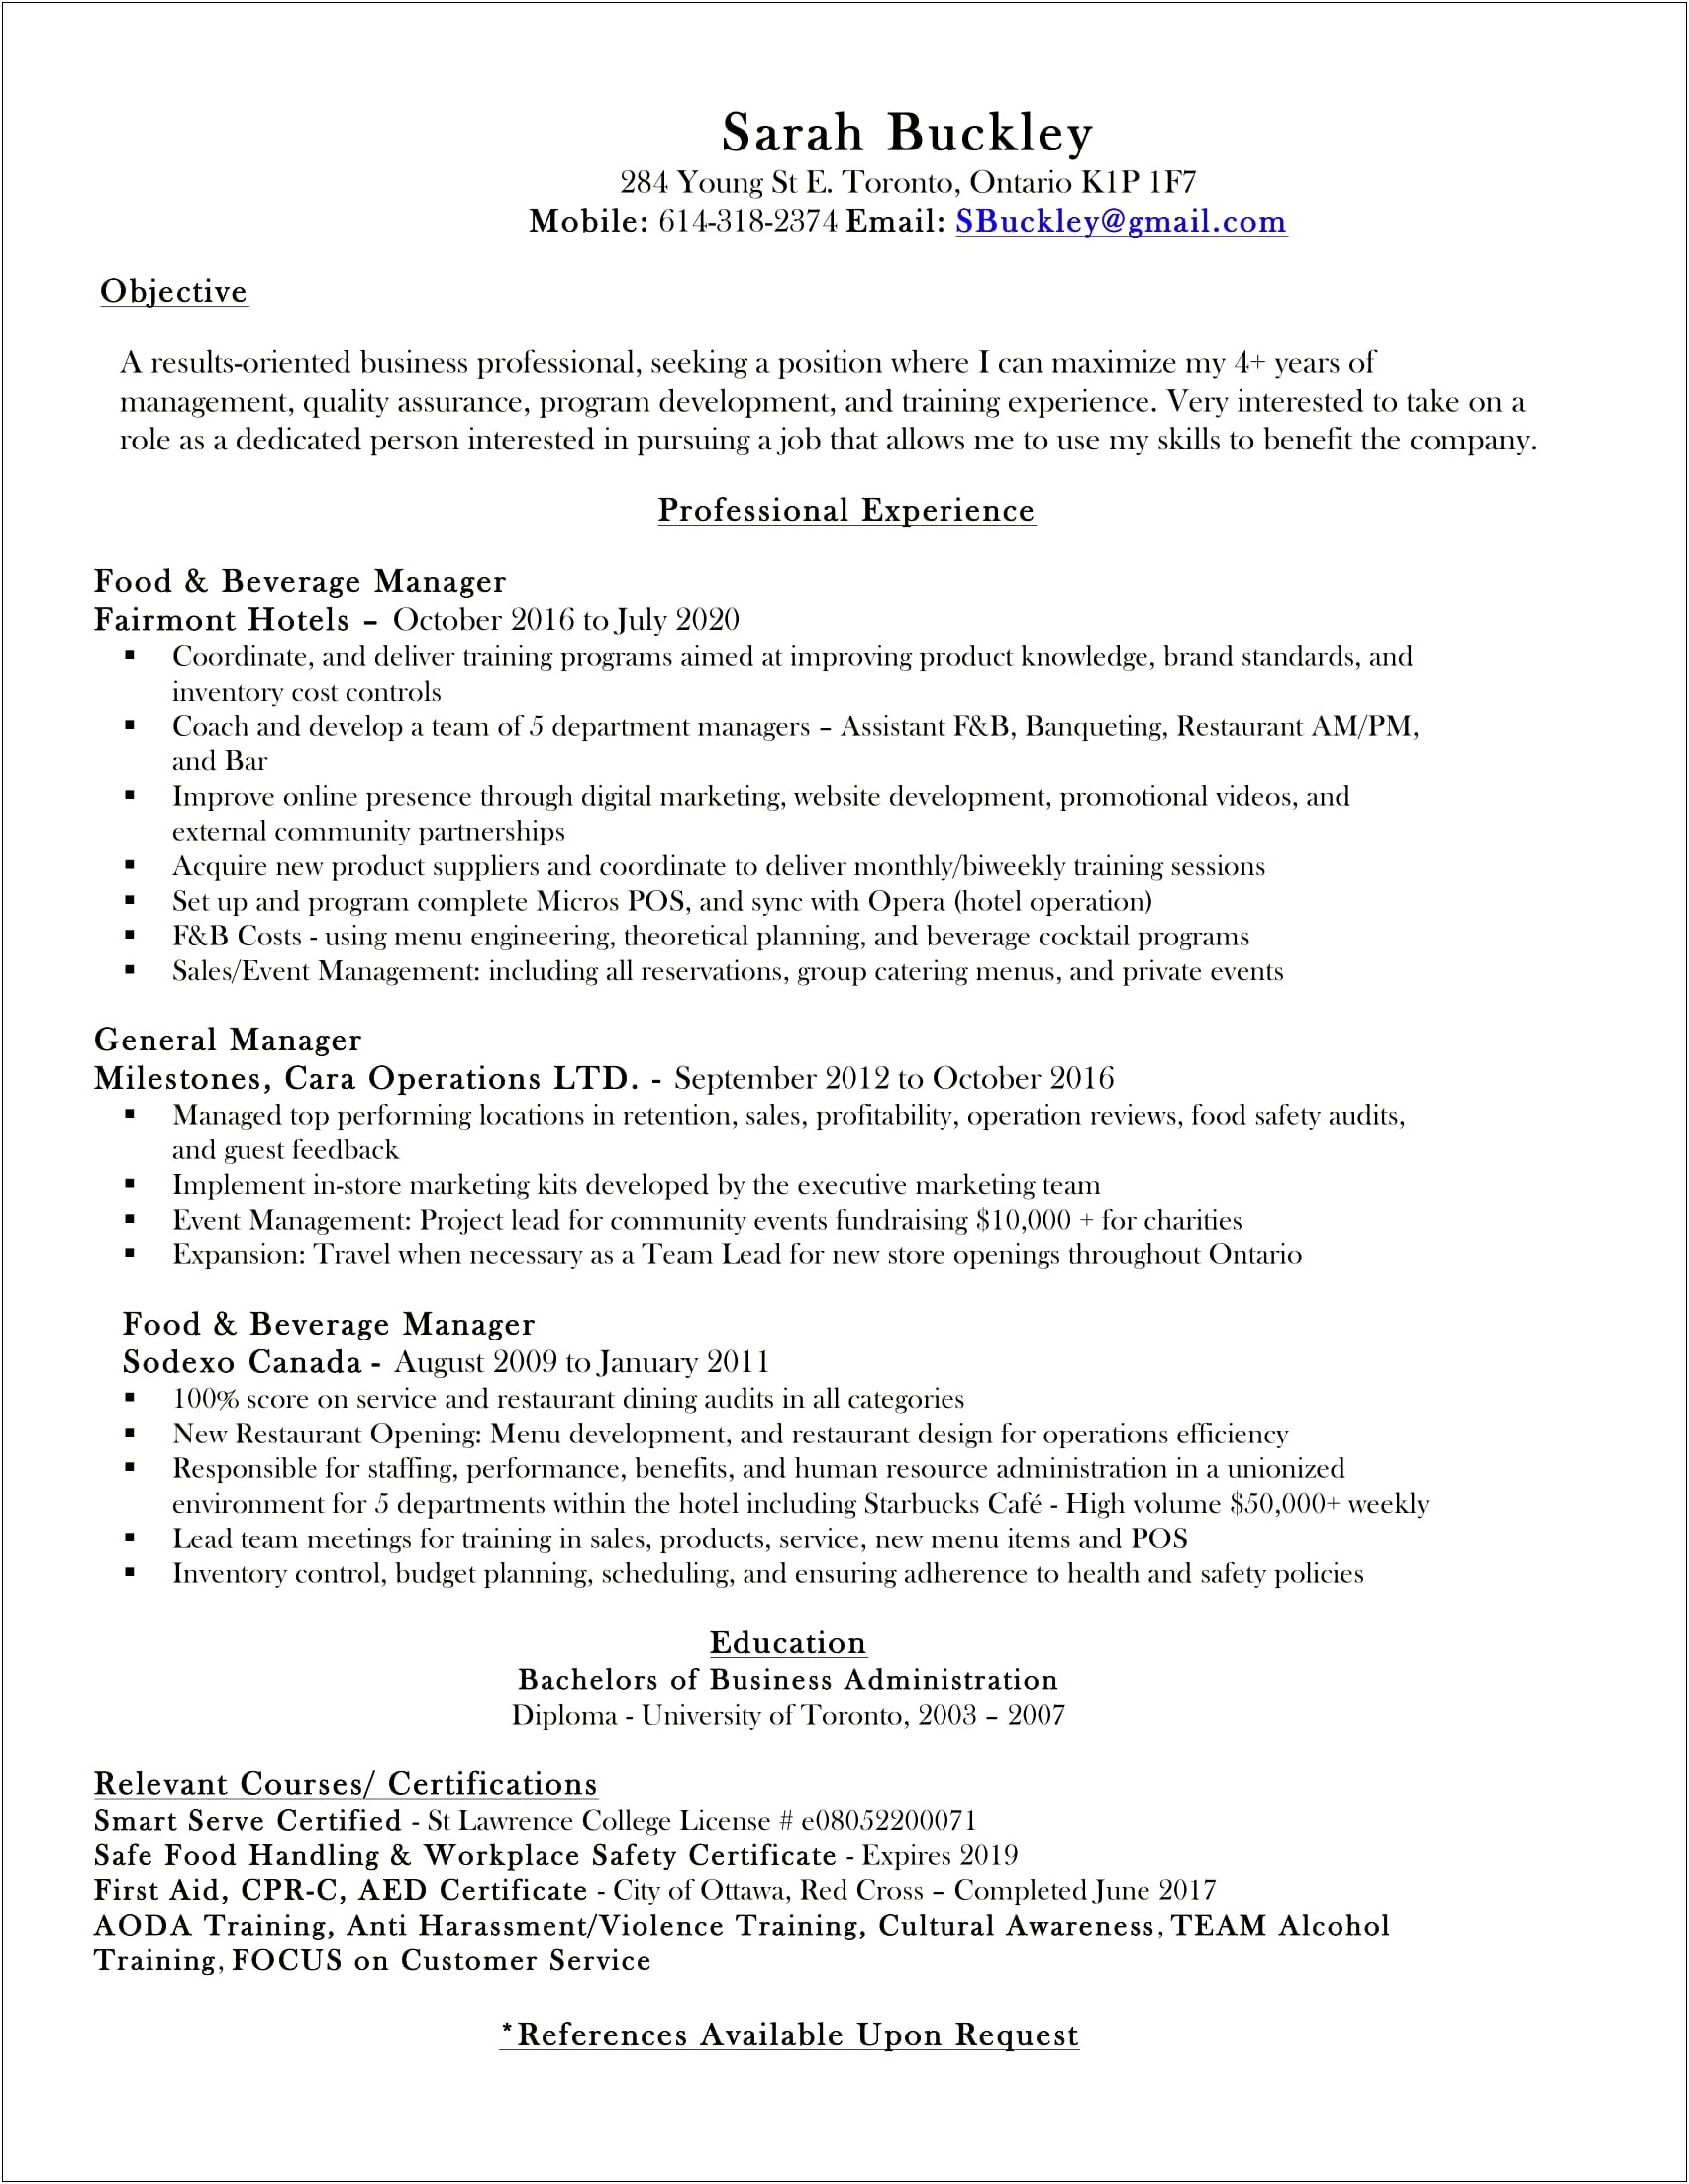 Resume And Cover Letter Guide Swarthmore